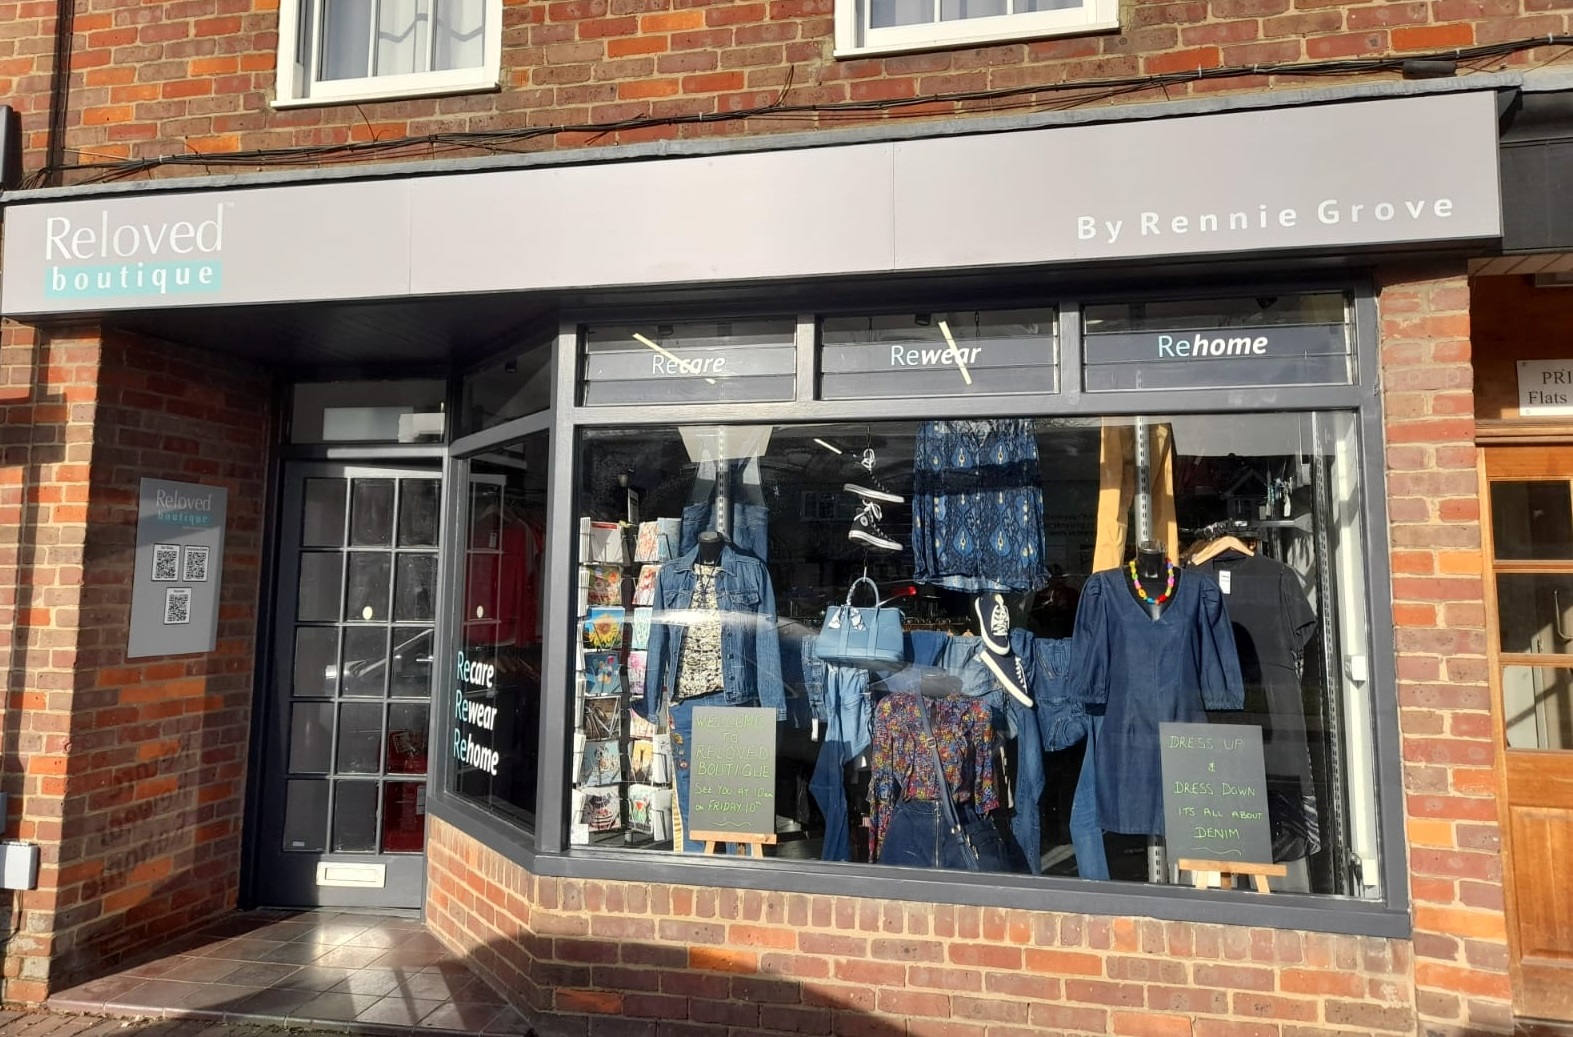 Our Chalfont St Giles ReLoved Boutique